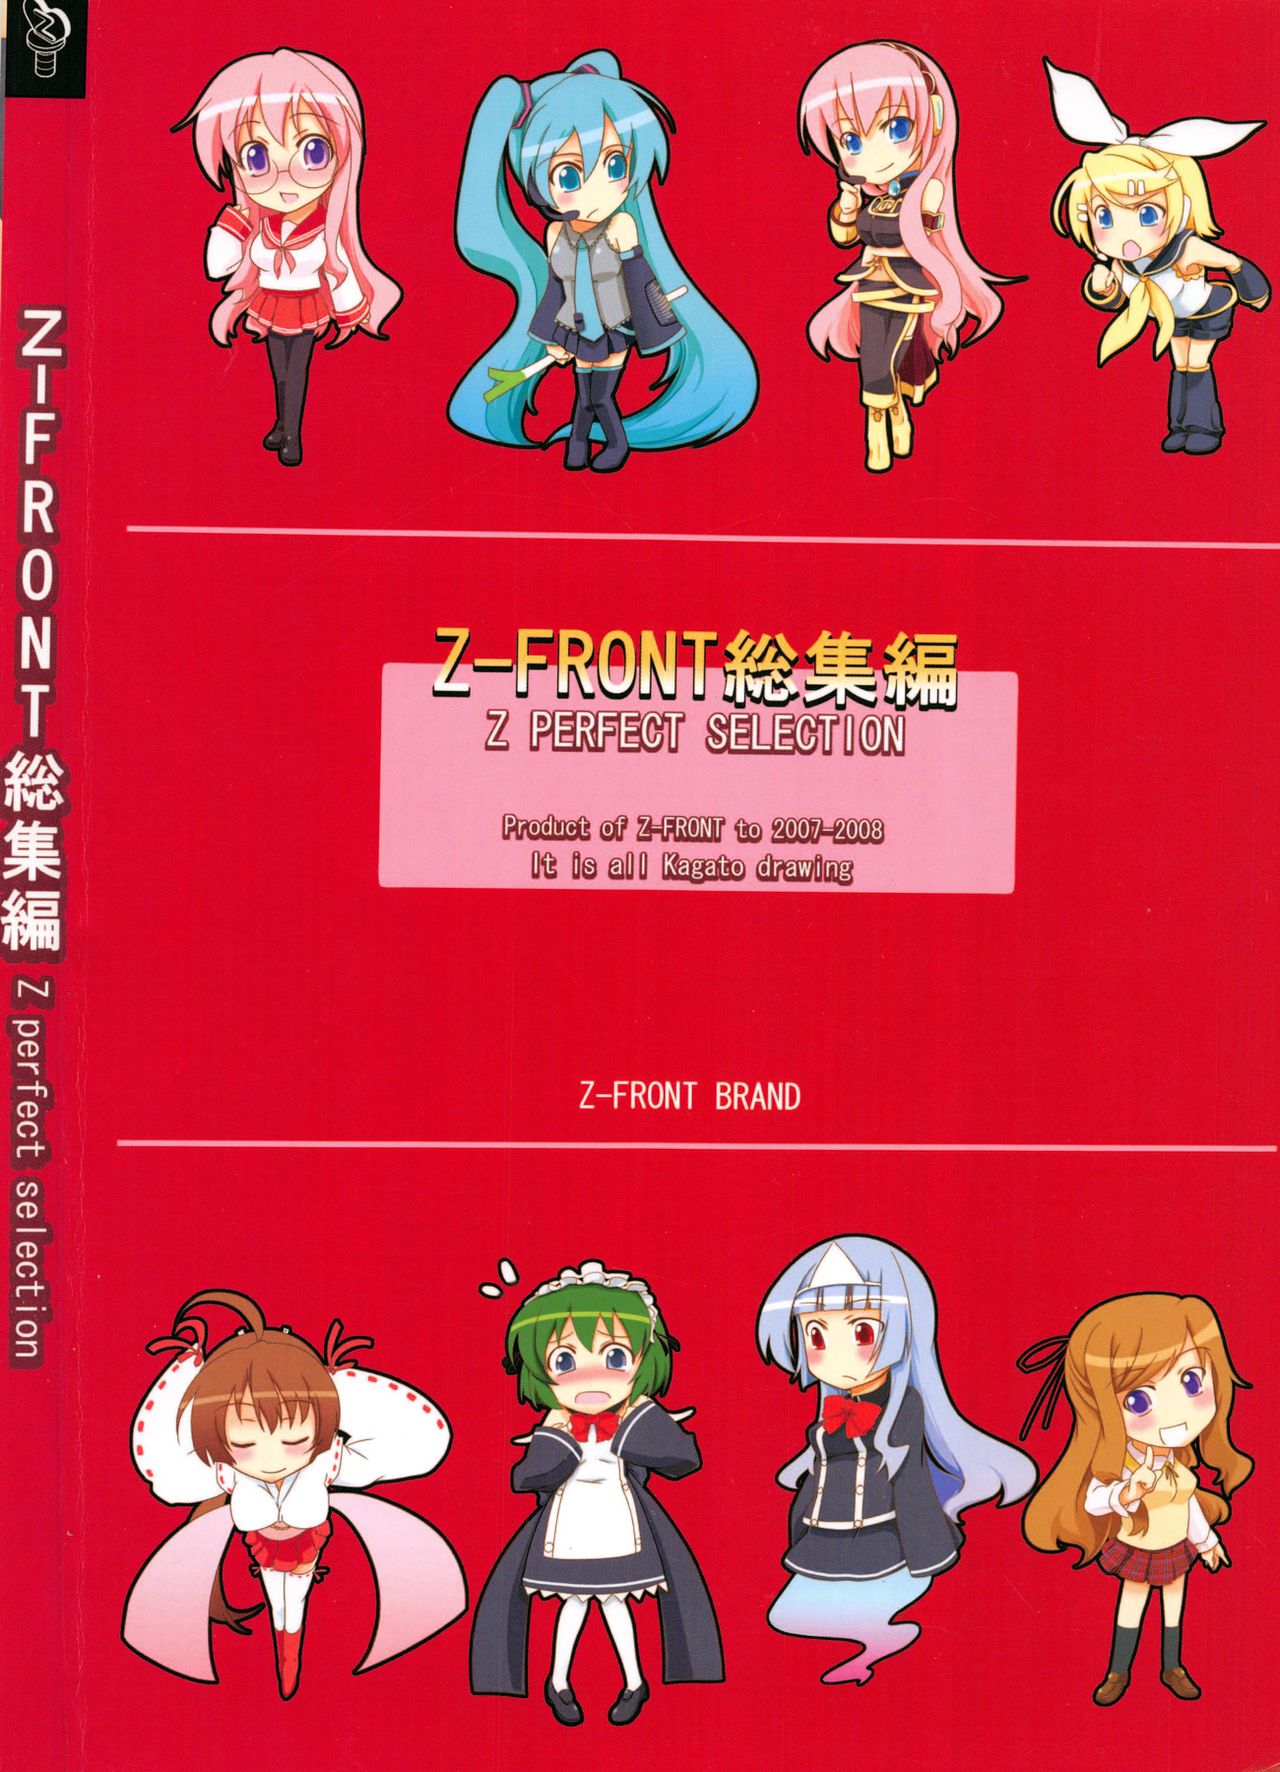 [Z-FRONT (加画都)] Z-FRONT総集編